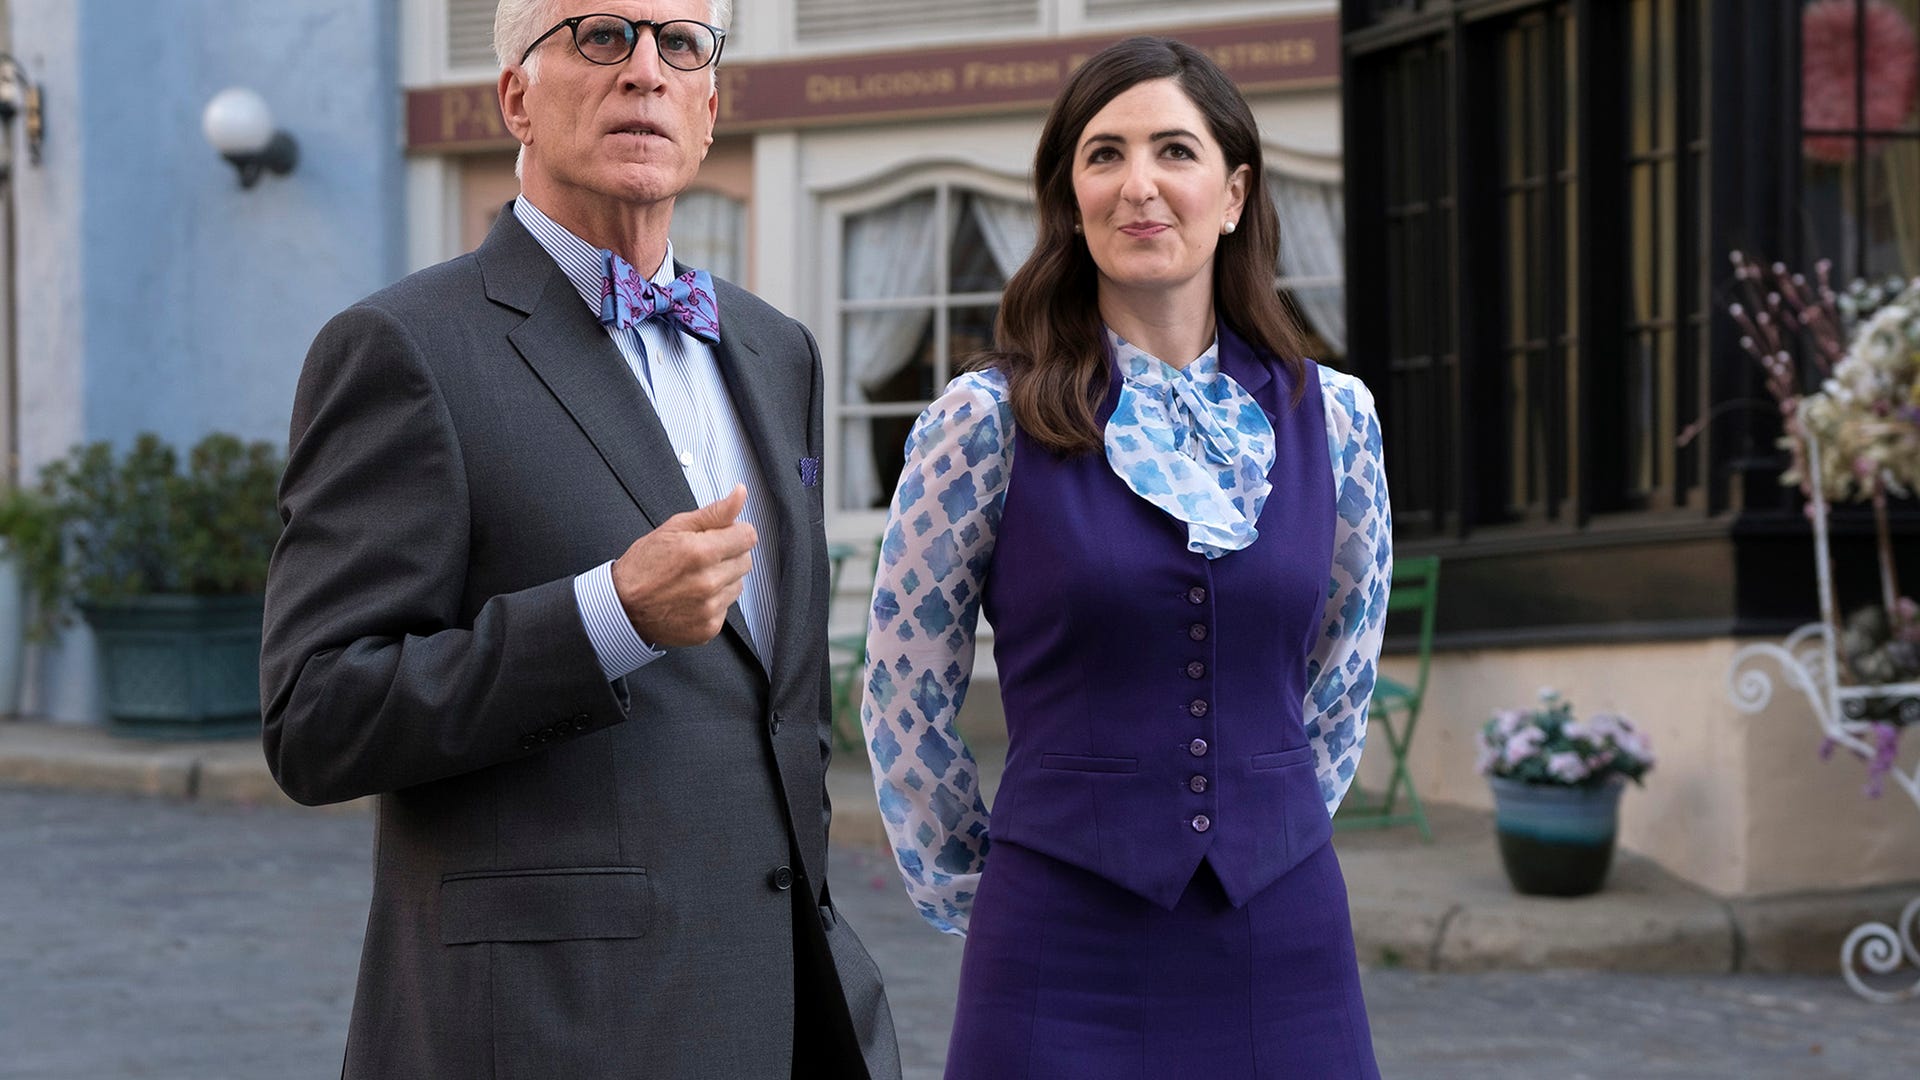 Ted Danson and D'arcy Carden, The Good Place​